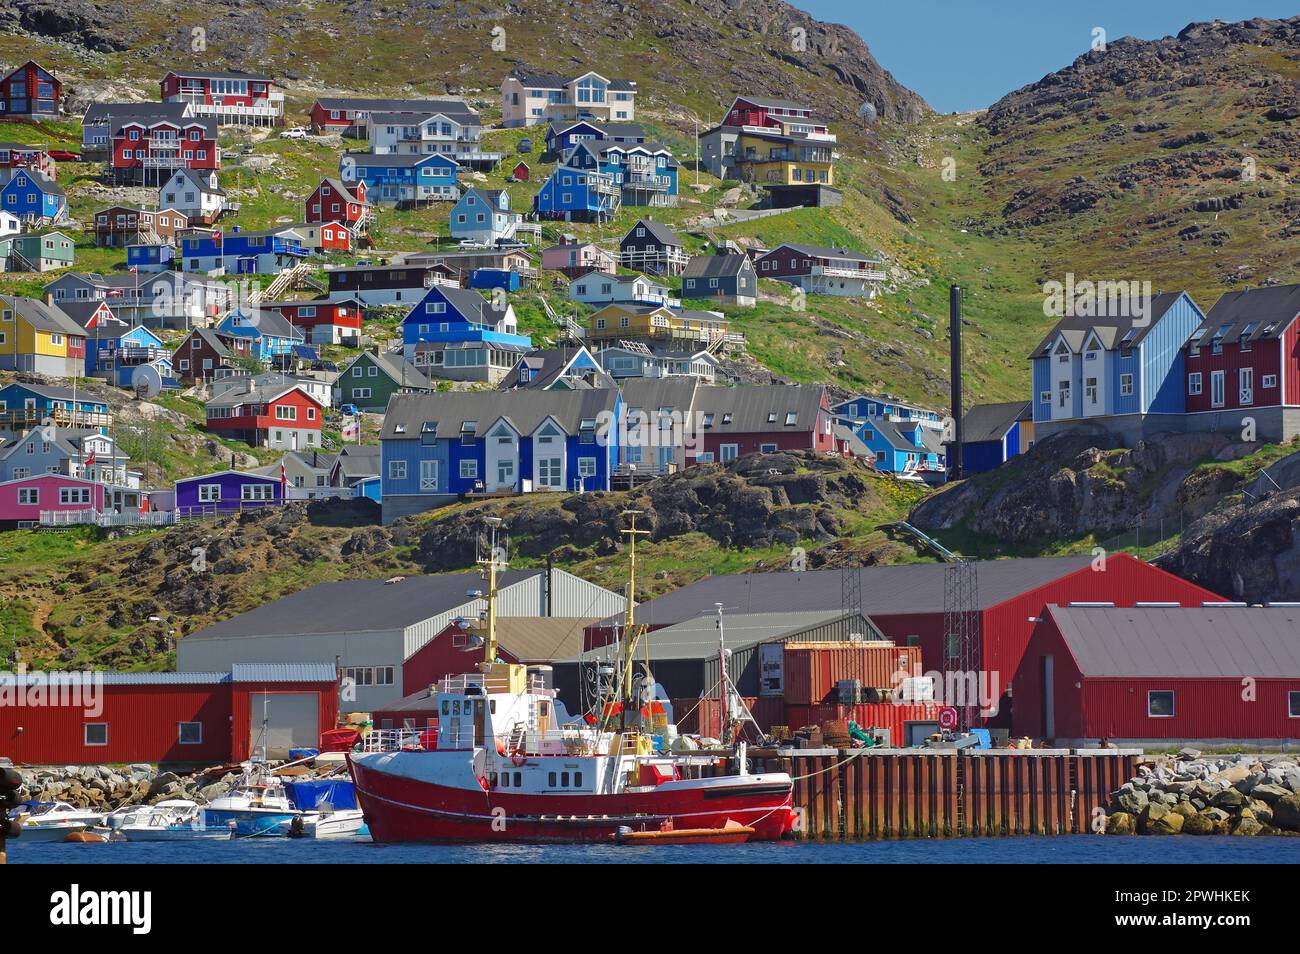 Fishing vessel and small boats, harbour and colourful houses, Qaqortoq, Kujalleq Municipality, Greenland, Denmark Stock Photo